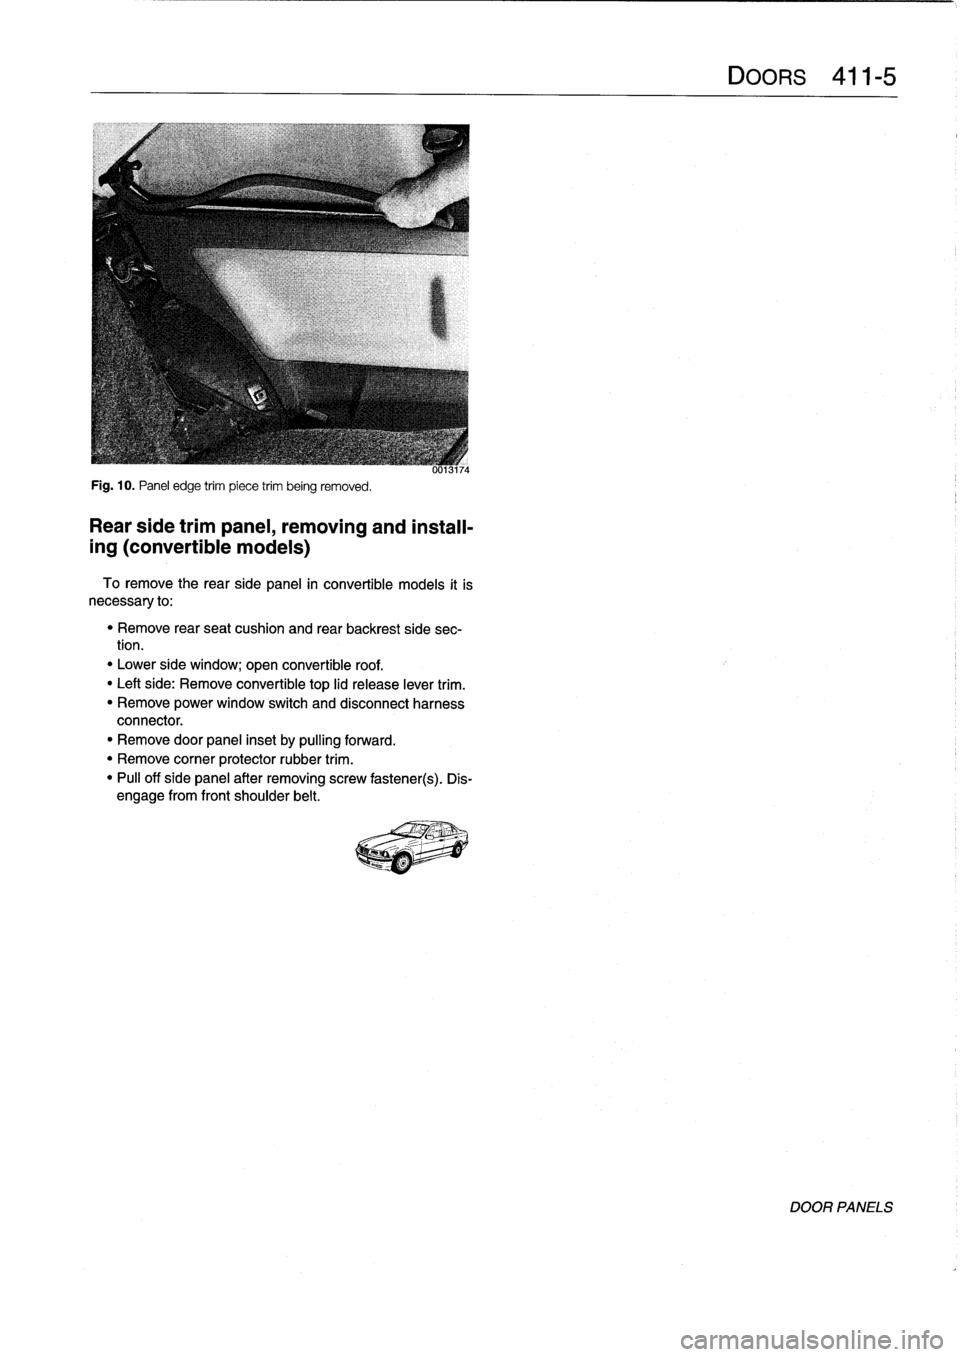 BMW 318i 1998 E36 Workshop Manual 
Fig
.
10
.
Panel
edge
trim
piece
trim
being
removed
.

Rear
side
trimpanel,
removing
and
install-

ing
(convertible
models)

To
remove
the
rearside
panel
in
convertible
models
it
is
necessary
to
:

"